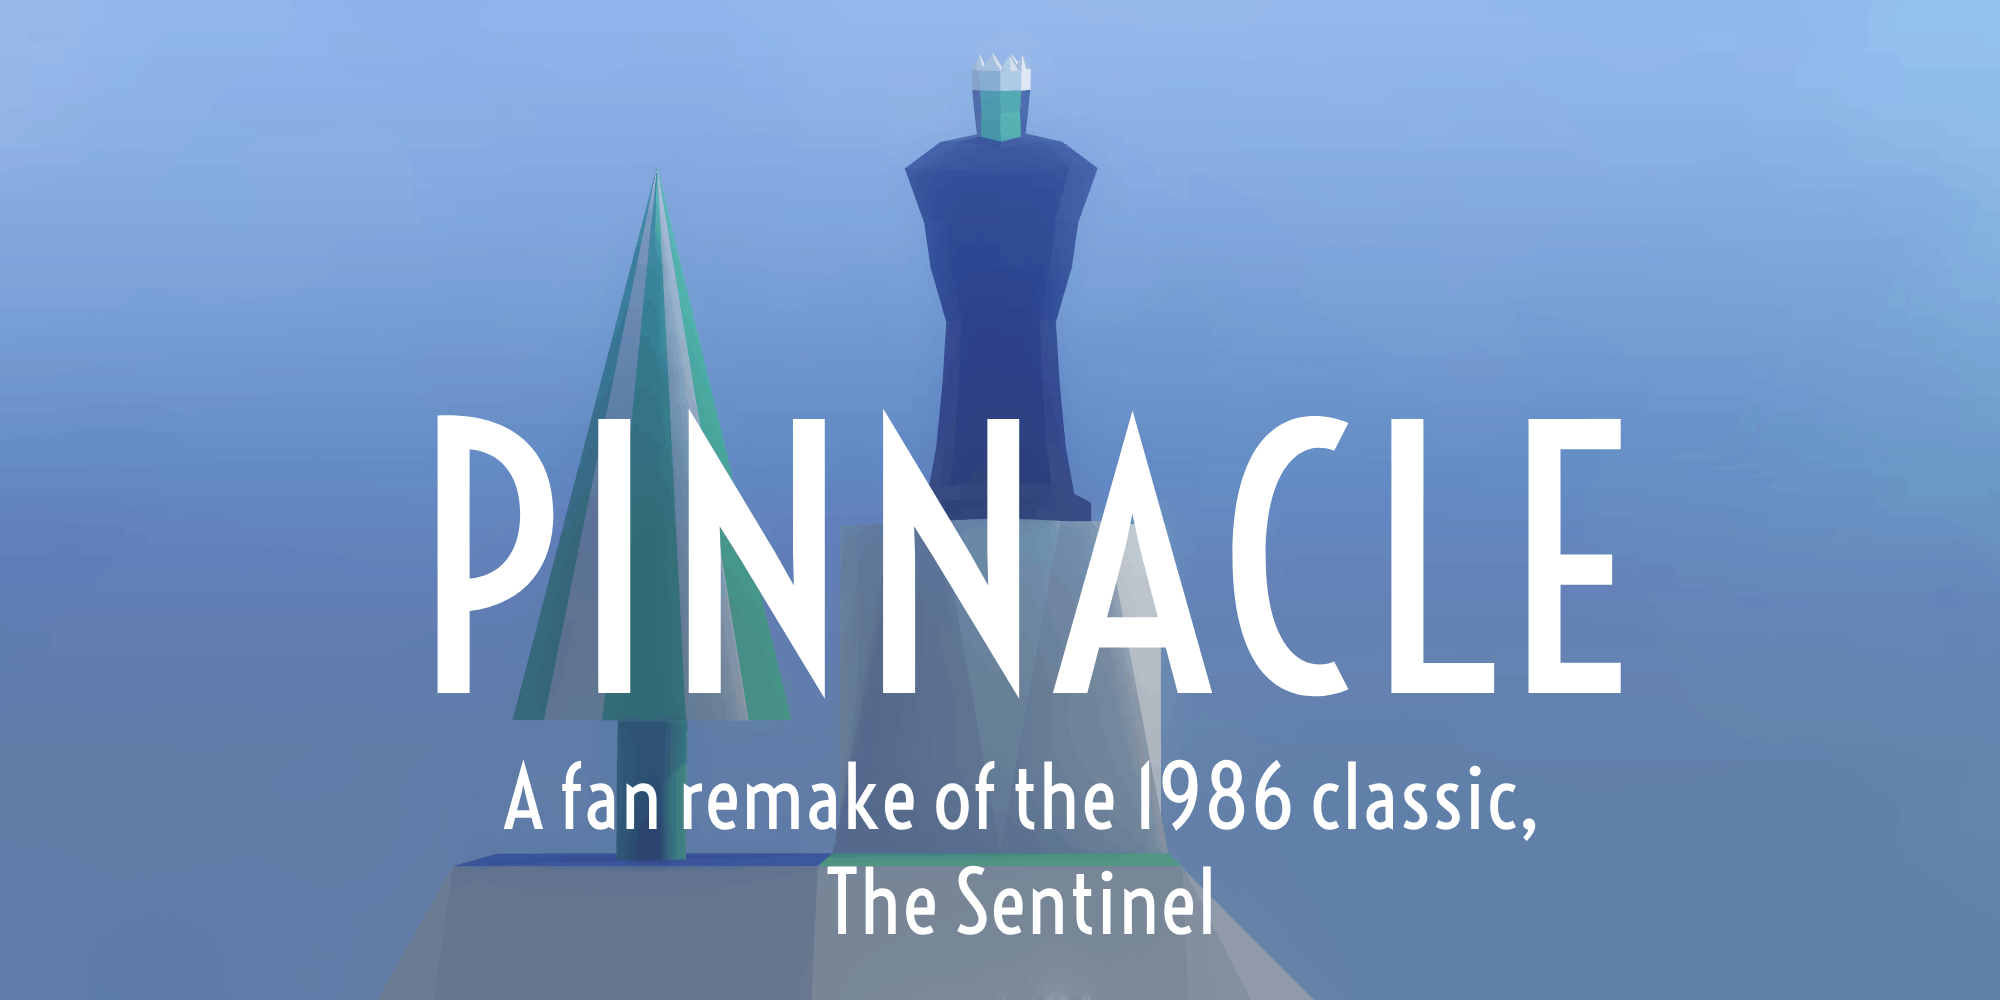 Pinnacle - a fan remake of the 1986 classic, The Sentinel